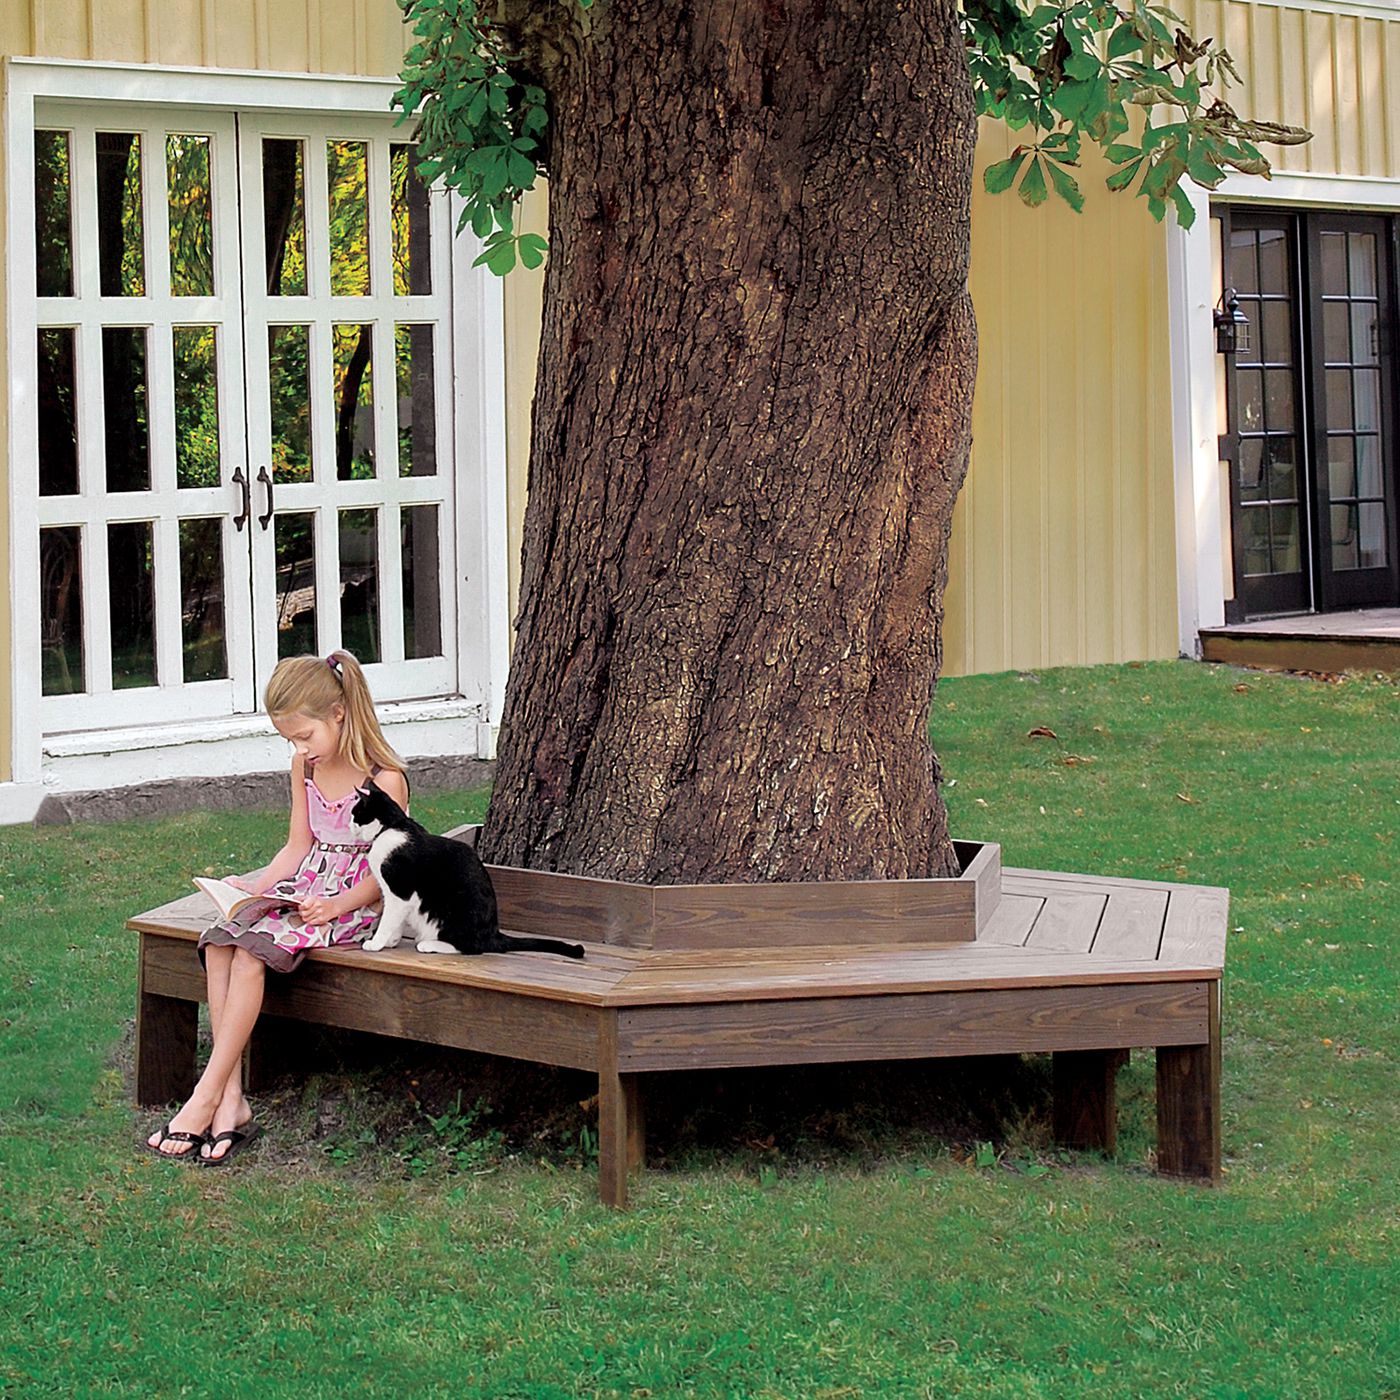 Wrap-Around Tree Bench - Wrapping wooden tree table